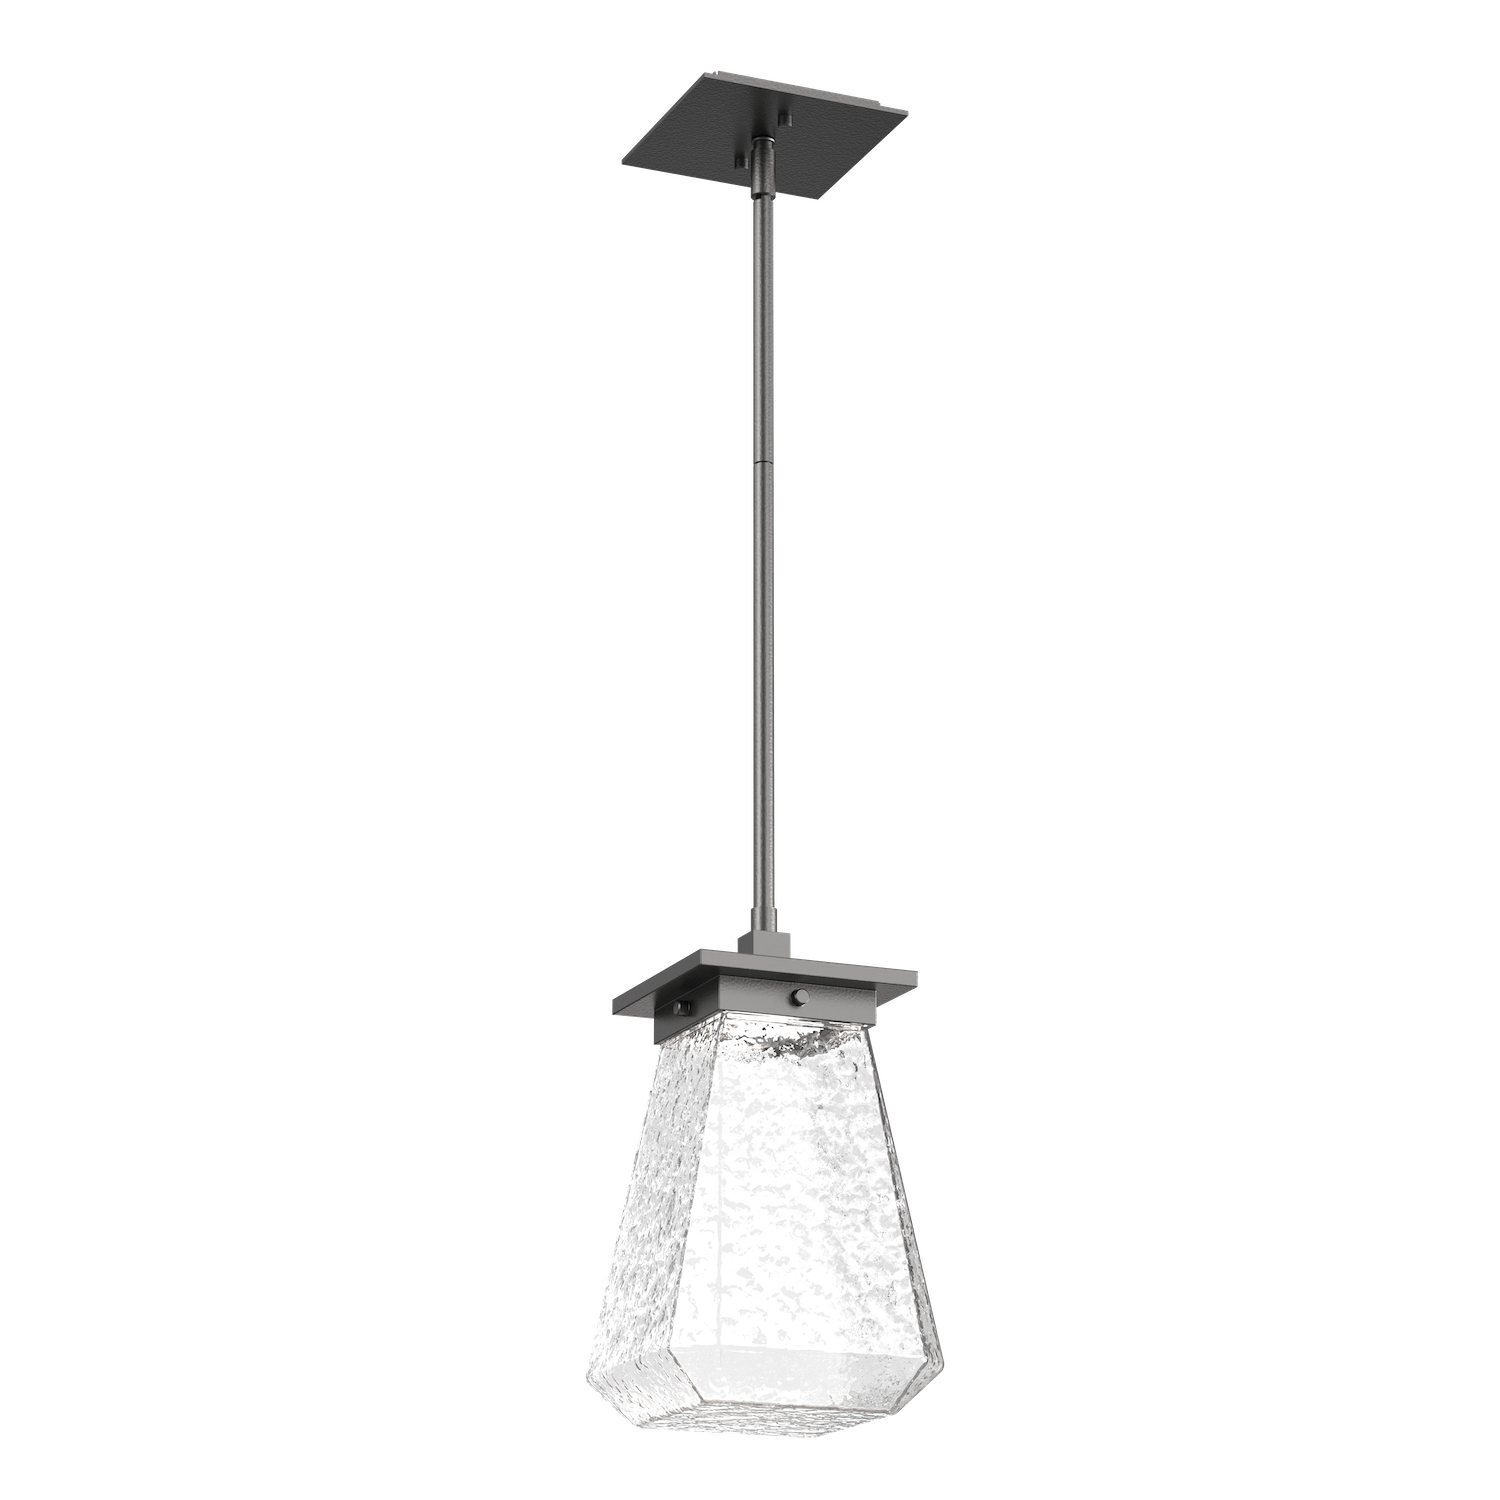 OPB0043-AH-AG-C-Hammerton-Studio-Beacon-14-inch-outdoor-pendant-light-with-argento-grey-finish-and-clear-blown-glass-shades-and-LED-lamping